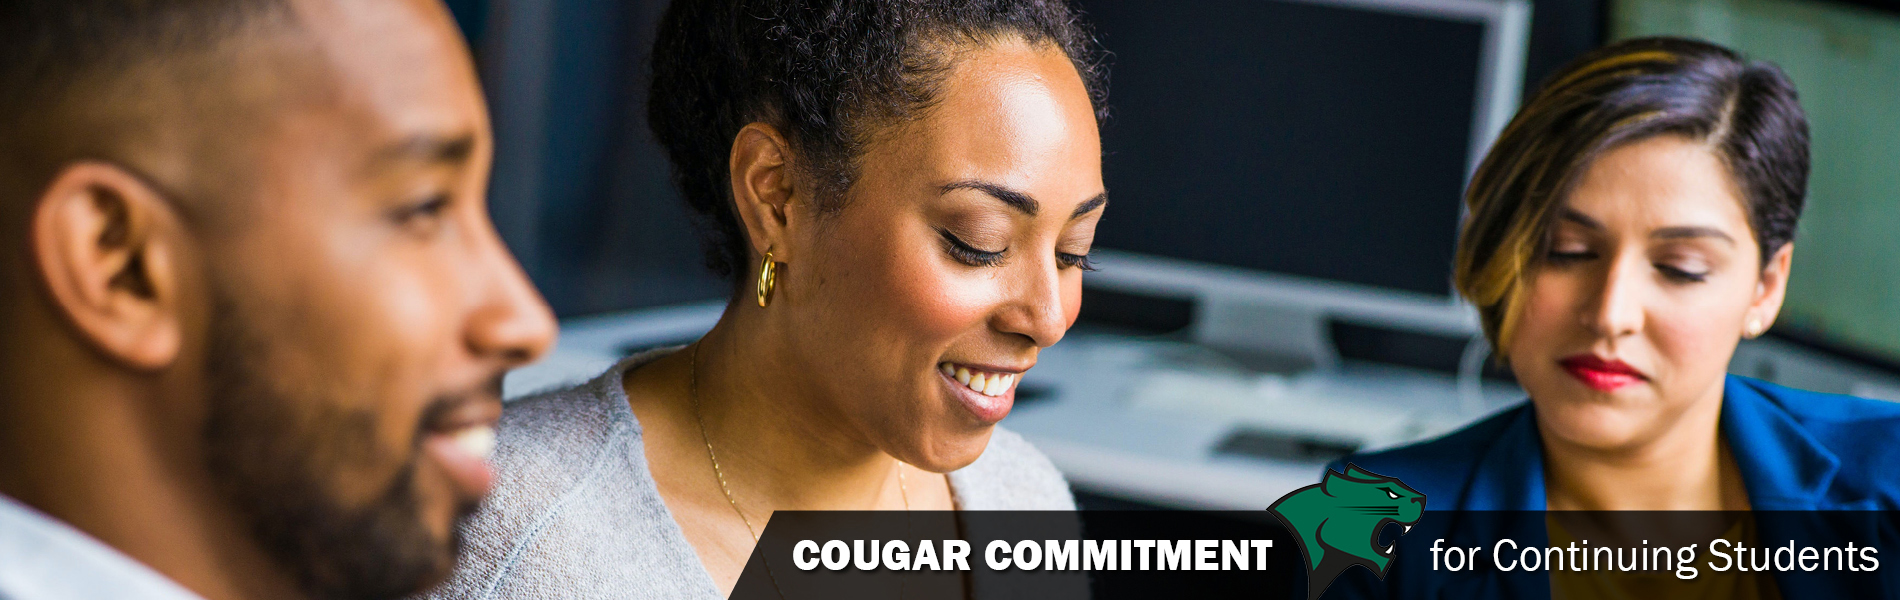 Cougar Commitment for continuing students